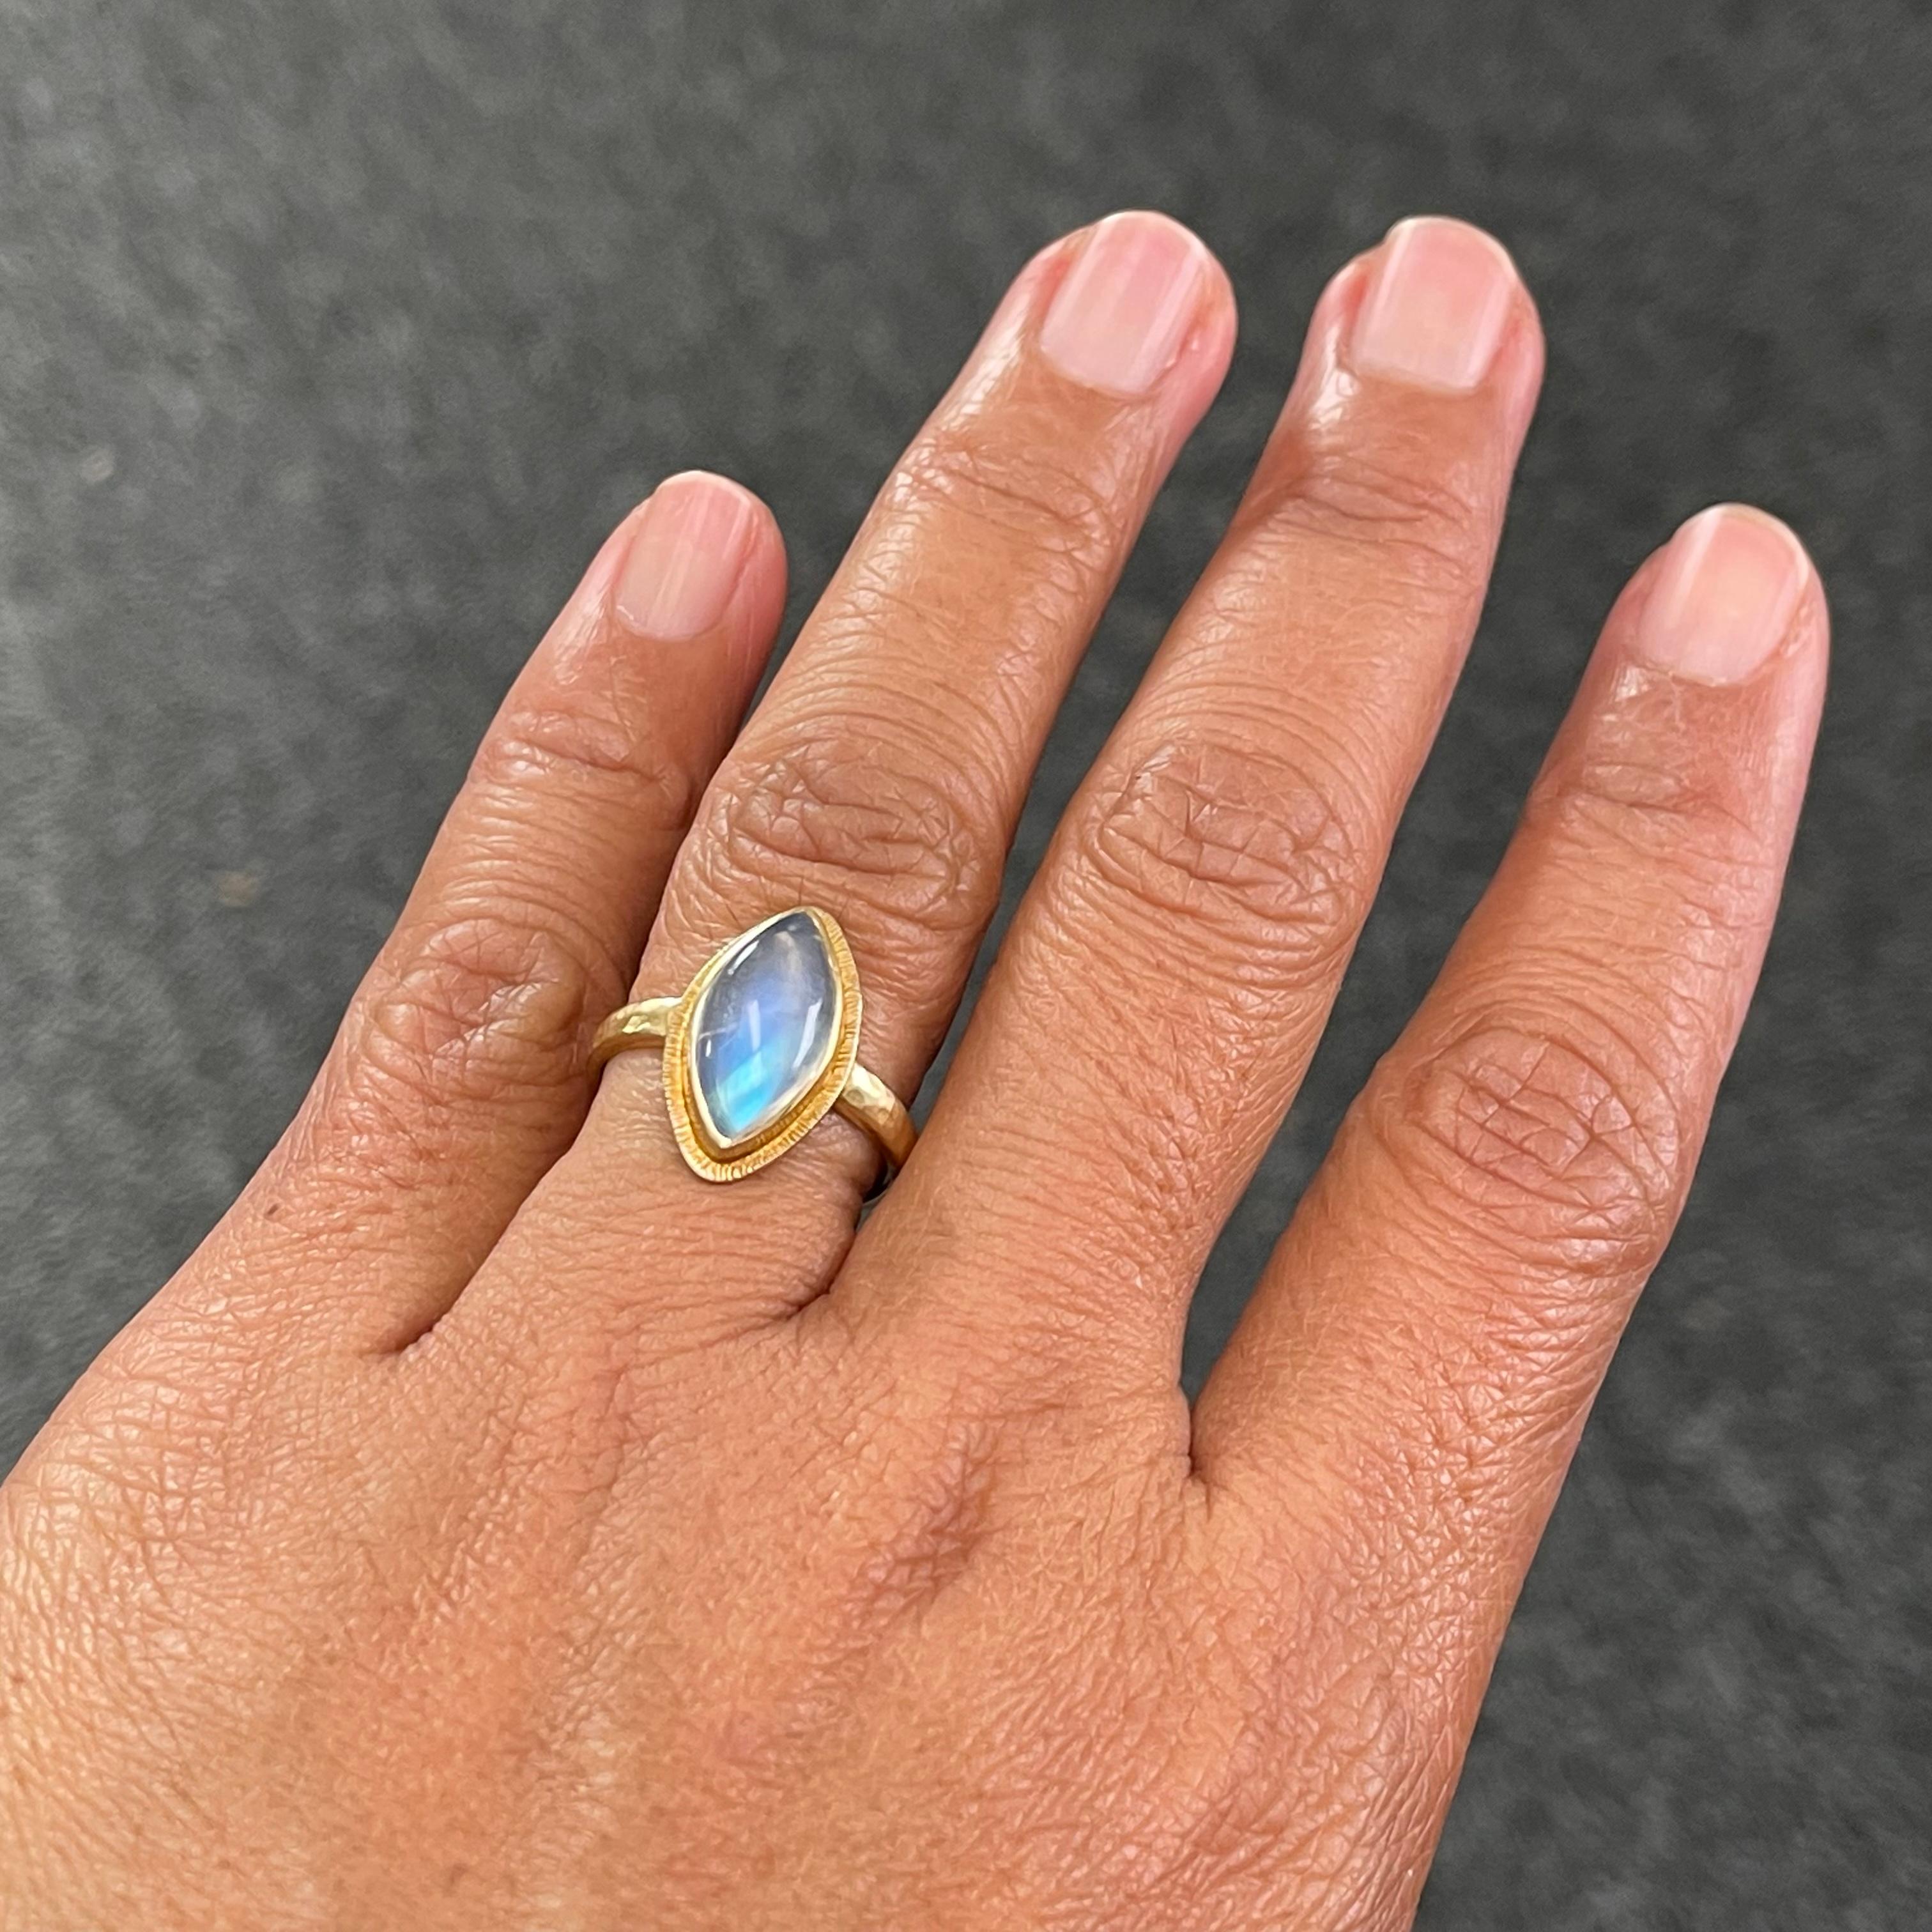 A lively 7 x 14 mm marquise shaped rainbow moonstone cabochon is held in a signature Steven Battelle line textured bezel atop a hammered matte-finish 18K shank.  The simple and organic look of the setting complements the shimmering blues of the